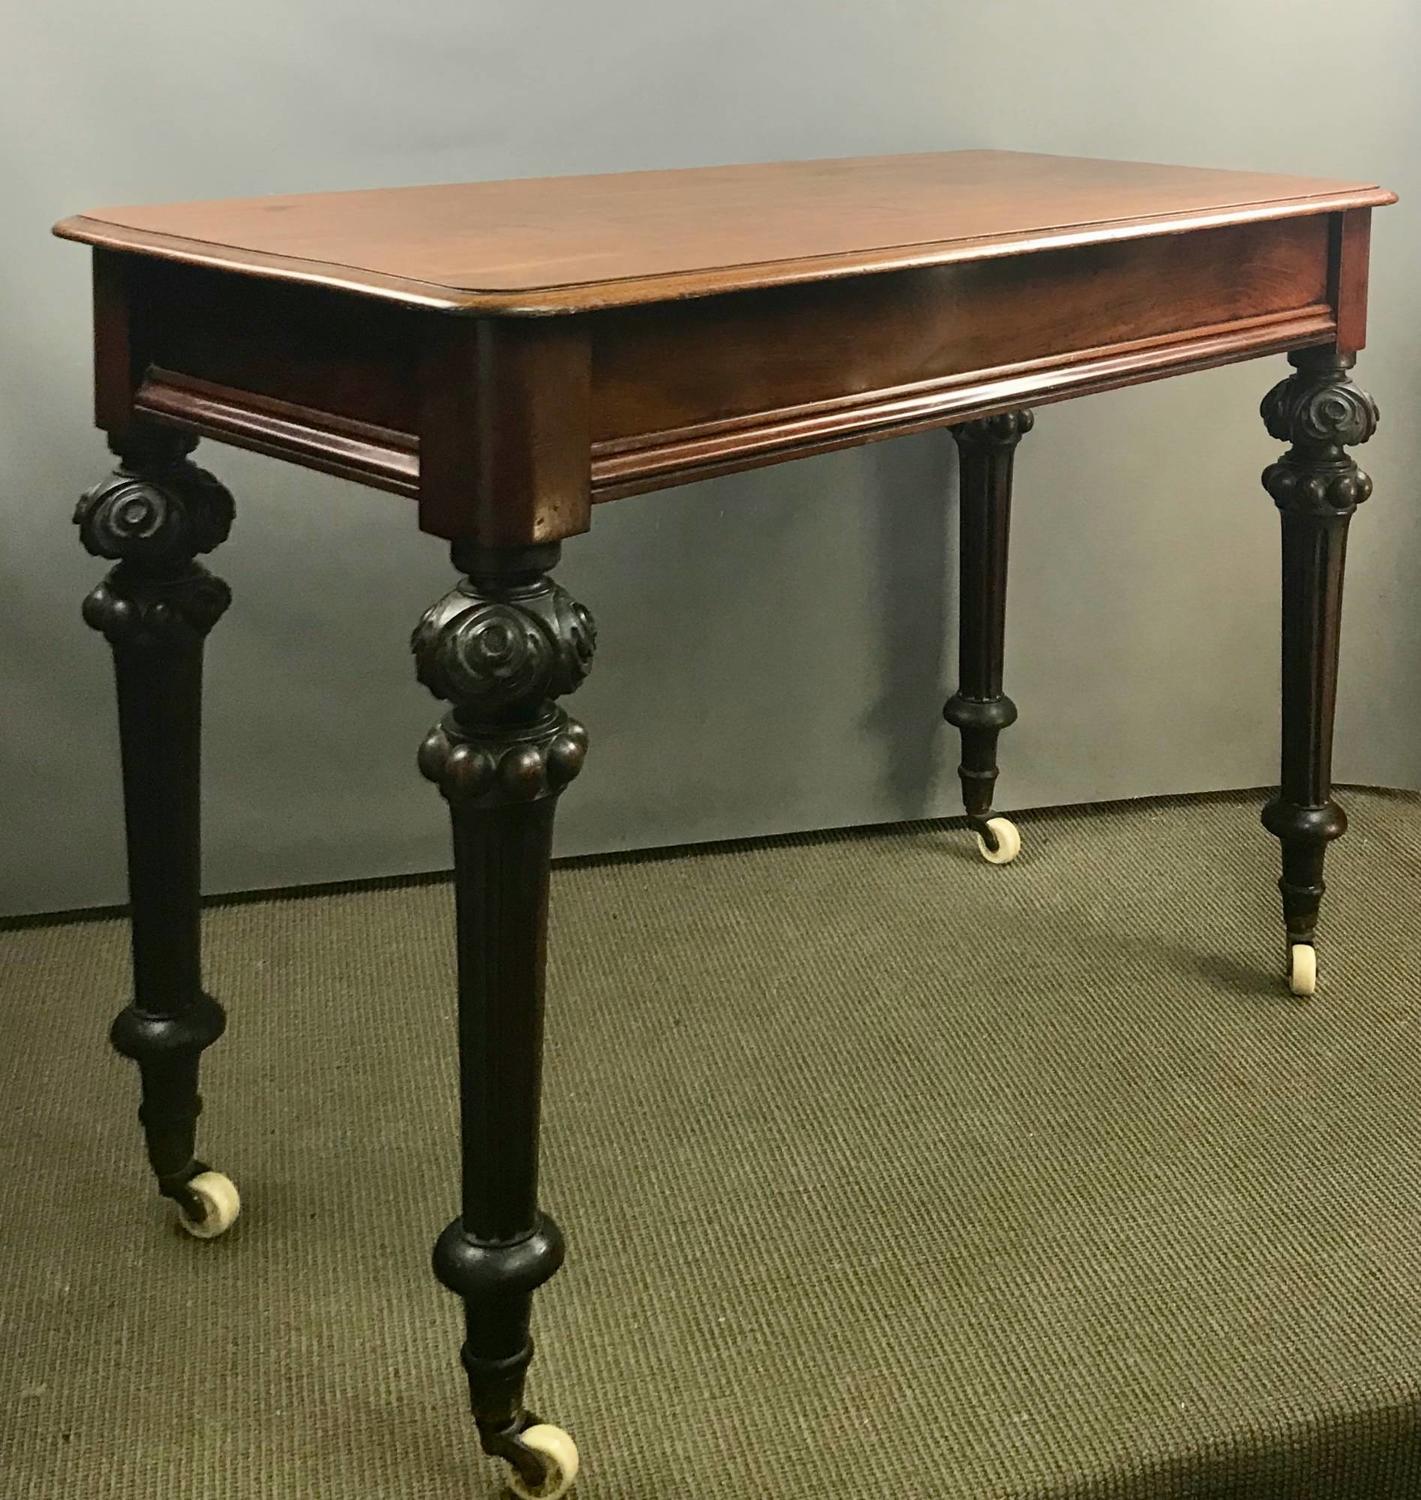 A Victorian Mahogany Hall Table with Frieze Drawer